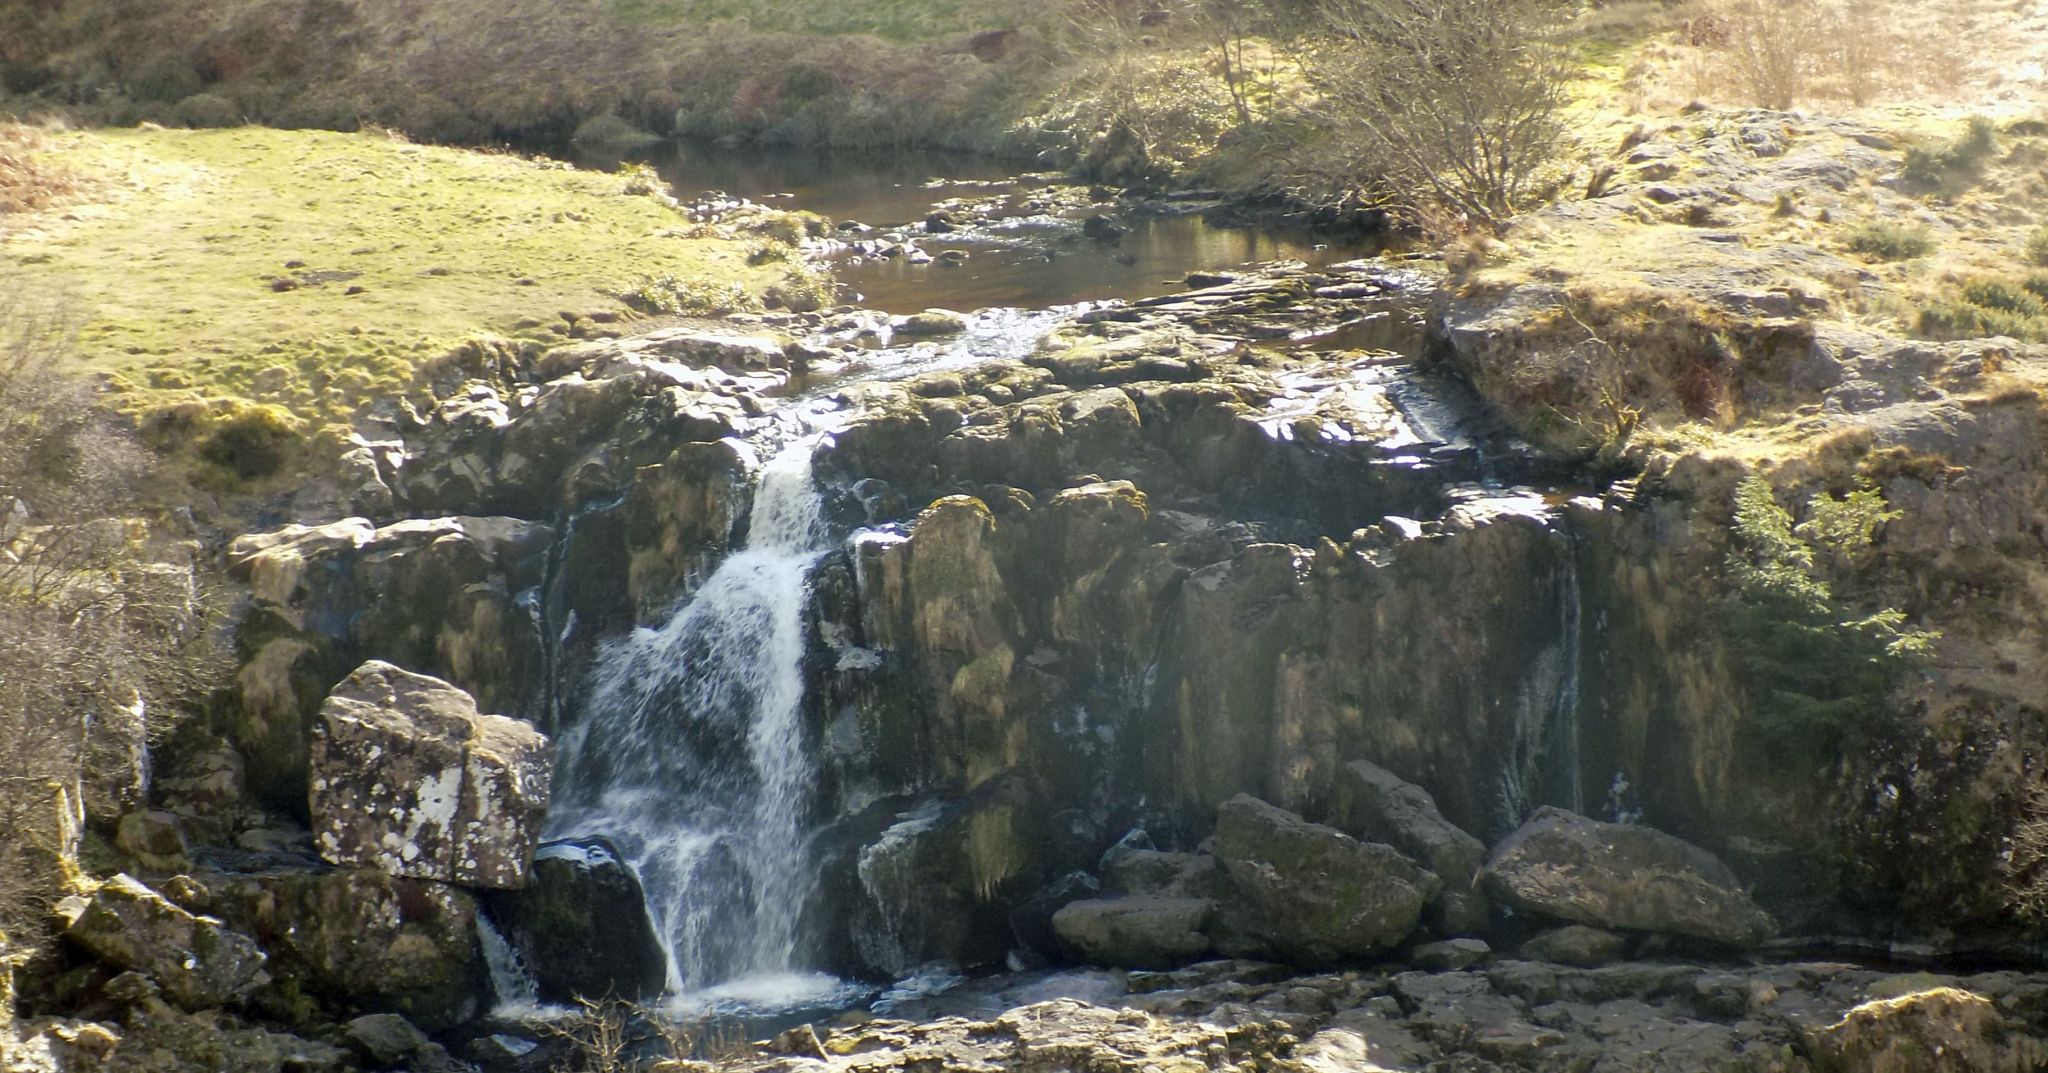 Loup of Fintry at foot of the Fintry Hills